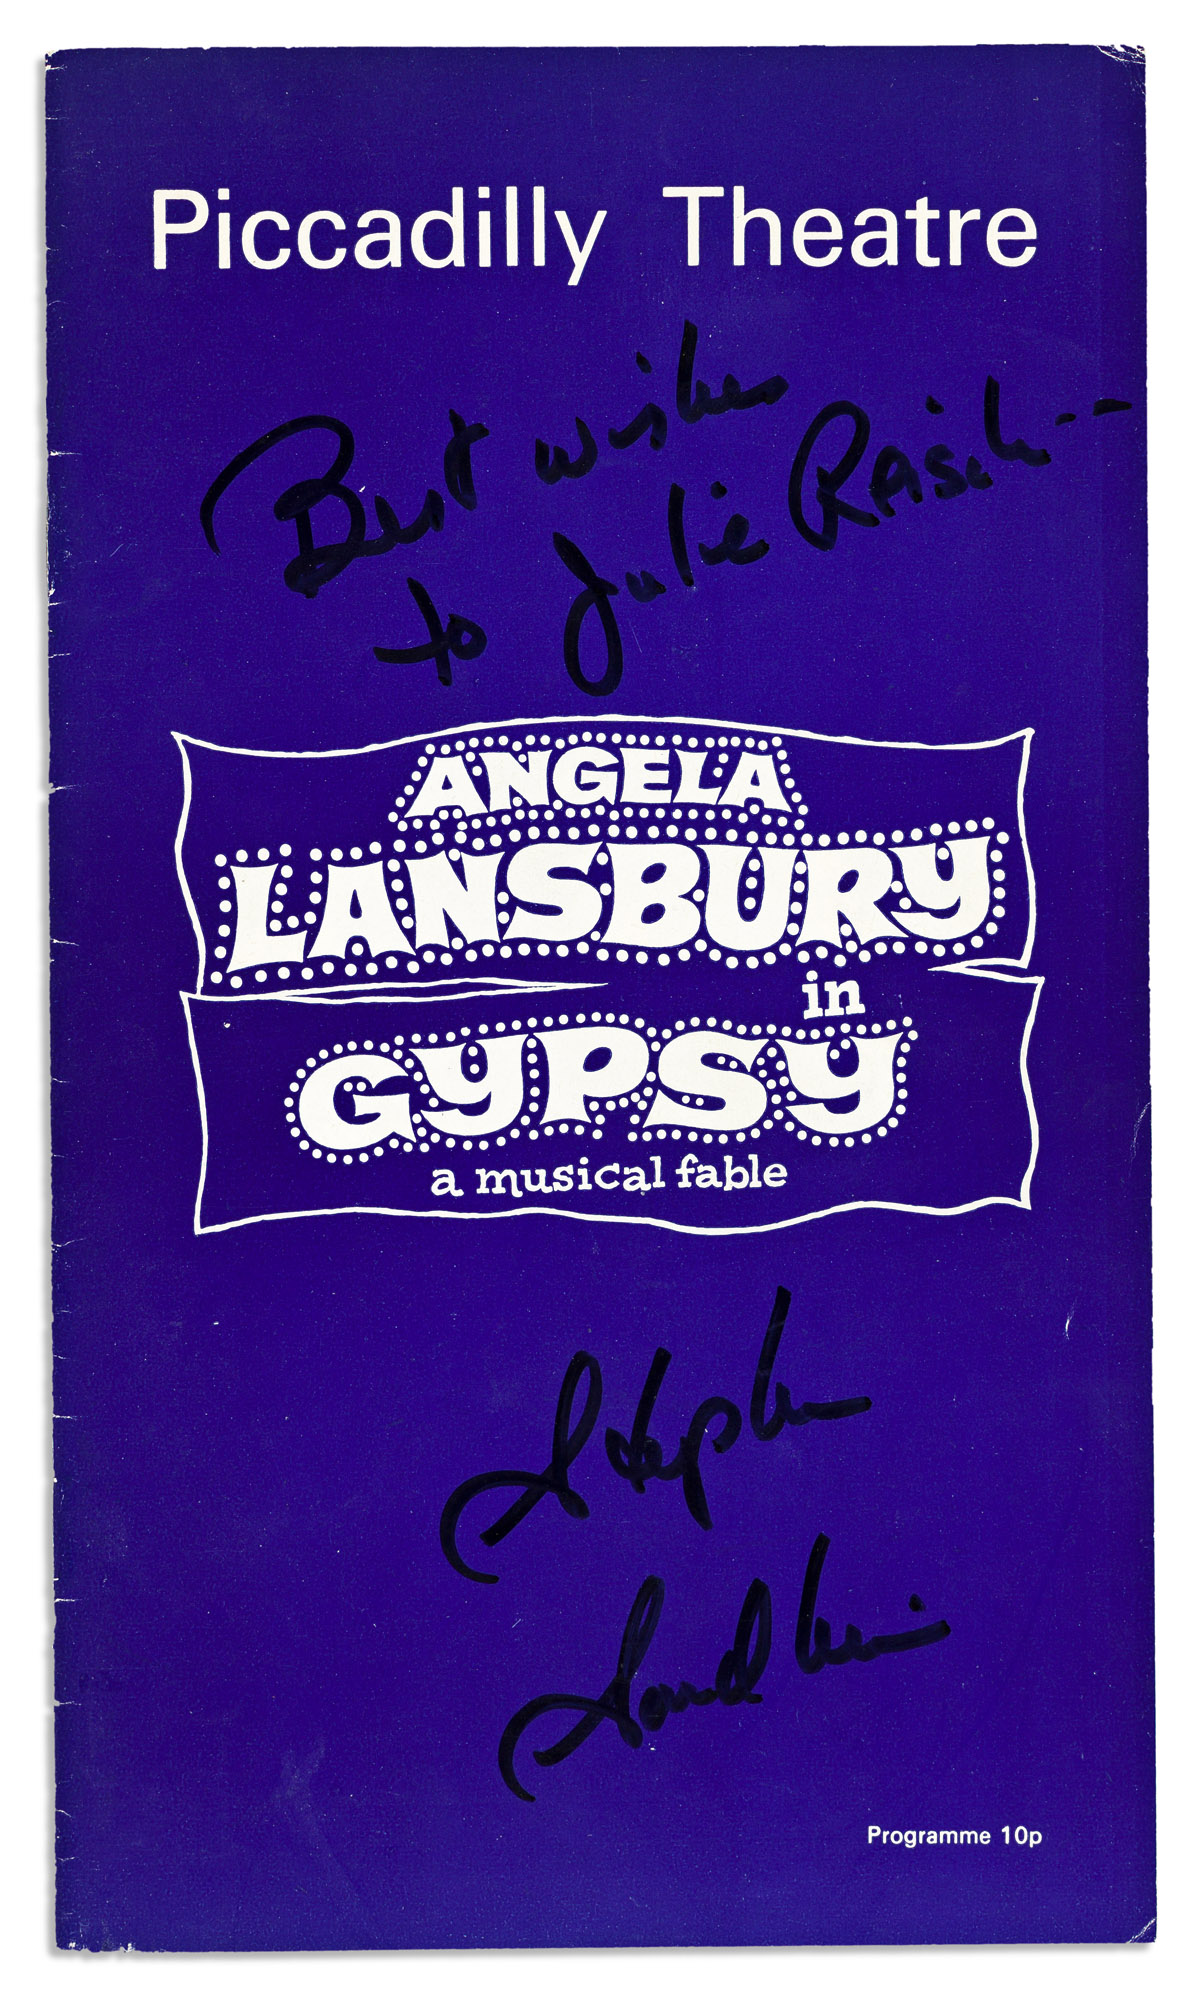 SONDHEIM, STEPHEN. Two programs for his plays, each Signed or Signed and Inscribed on the front cover: